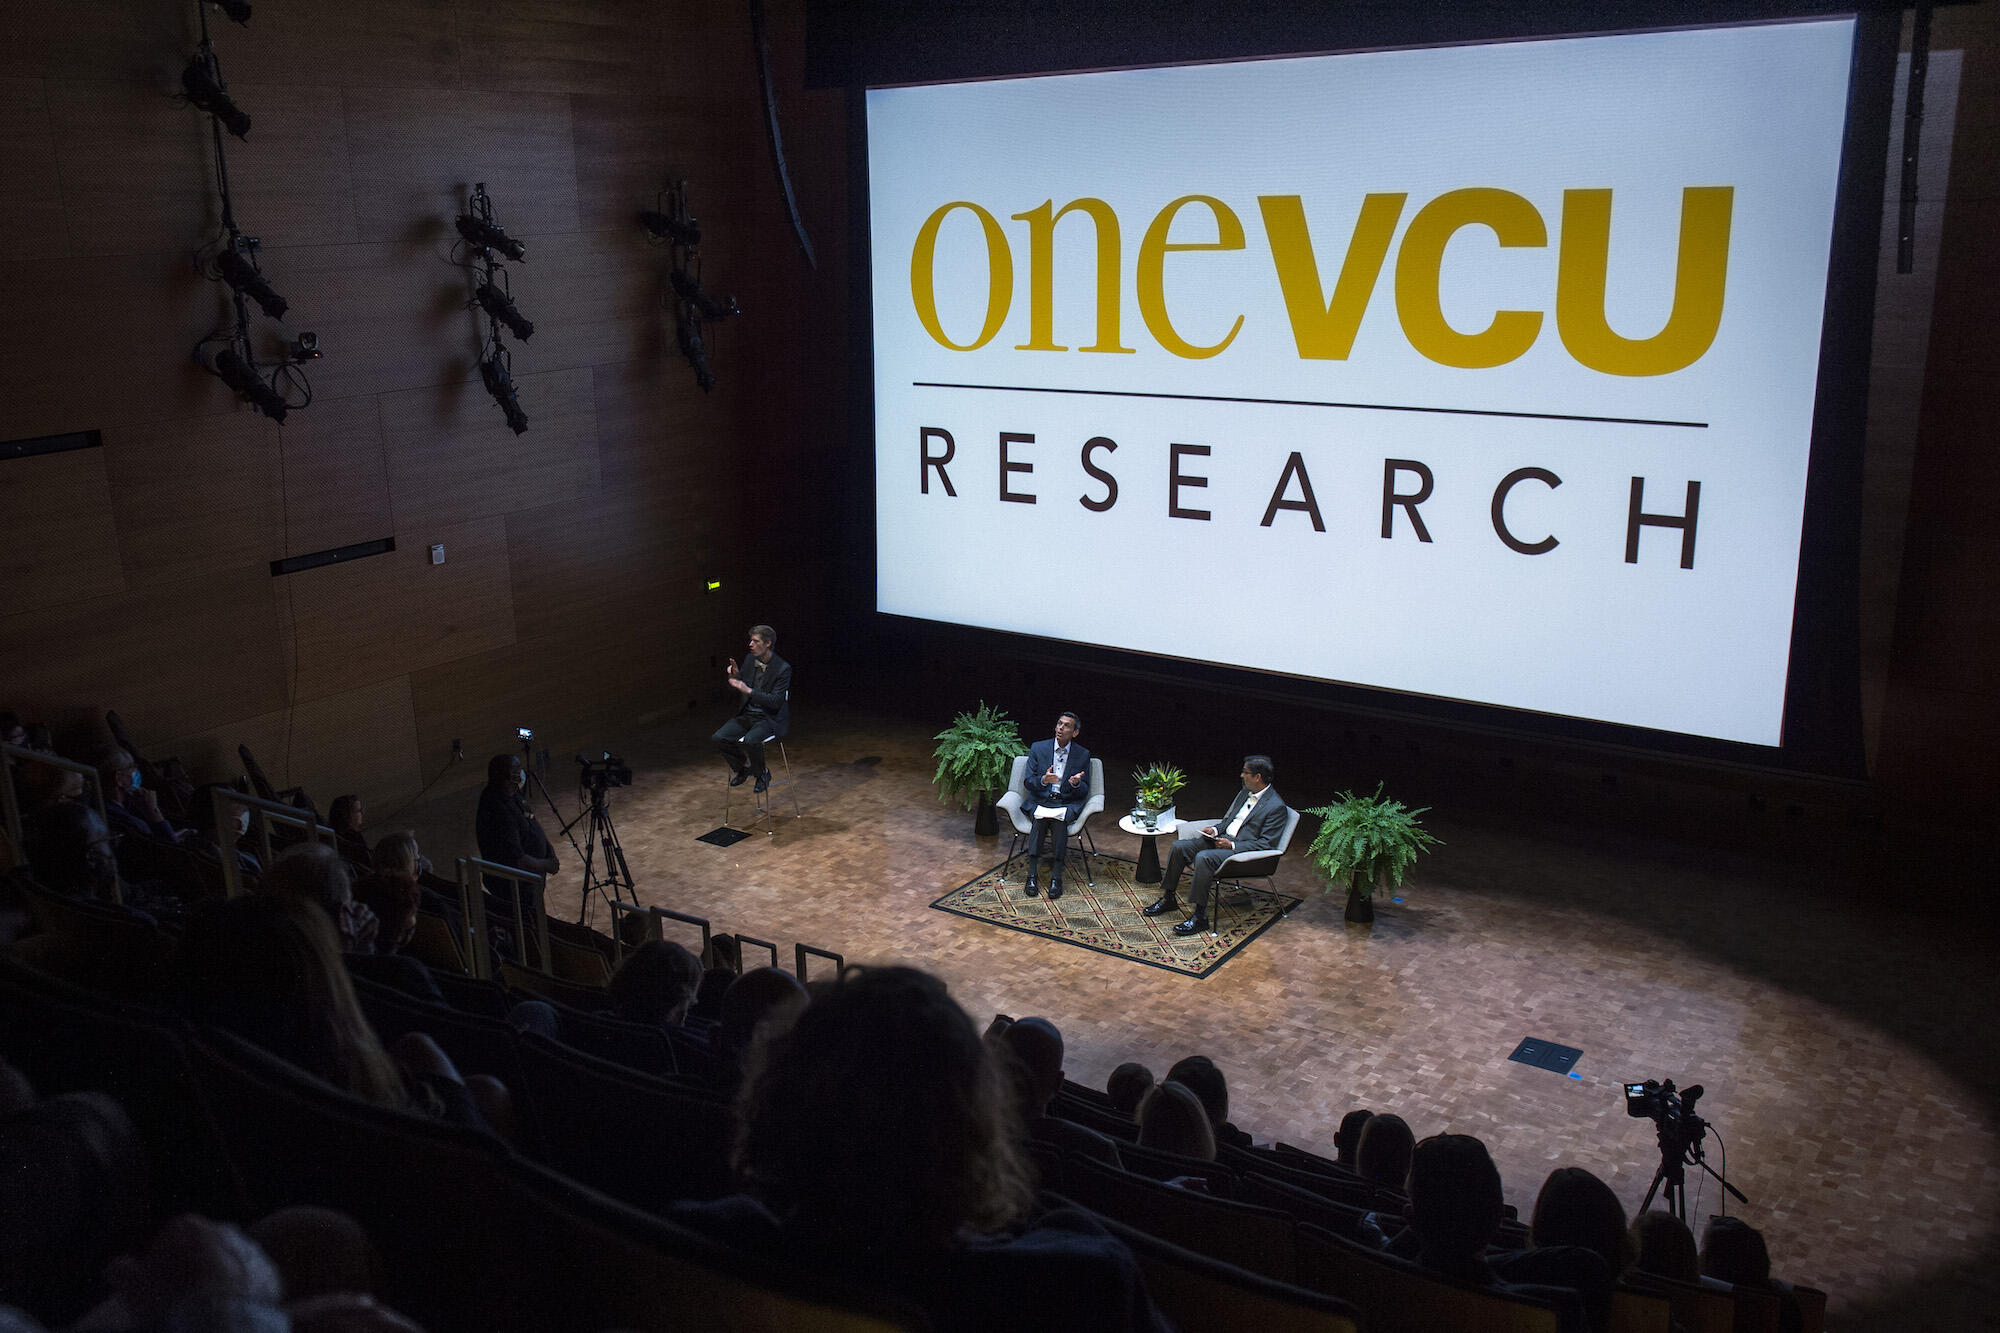 VCU President Michael Rao, left, and P. Srirama Rao, vice president for research and innovation, discuss VCU's new research strategic plan on Oct. 20 at the Institute for Contemporary Art.